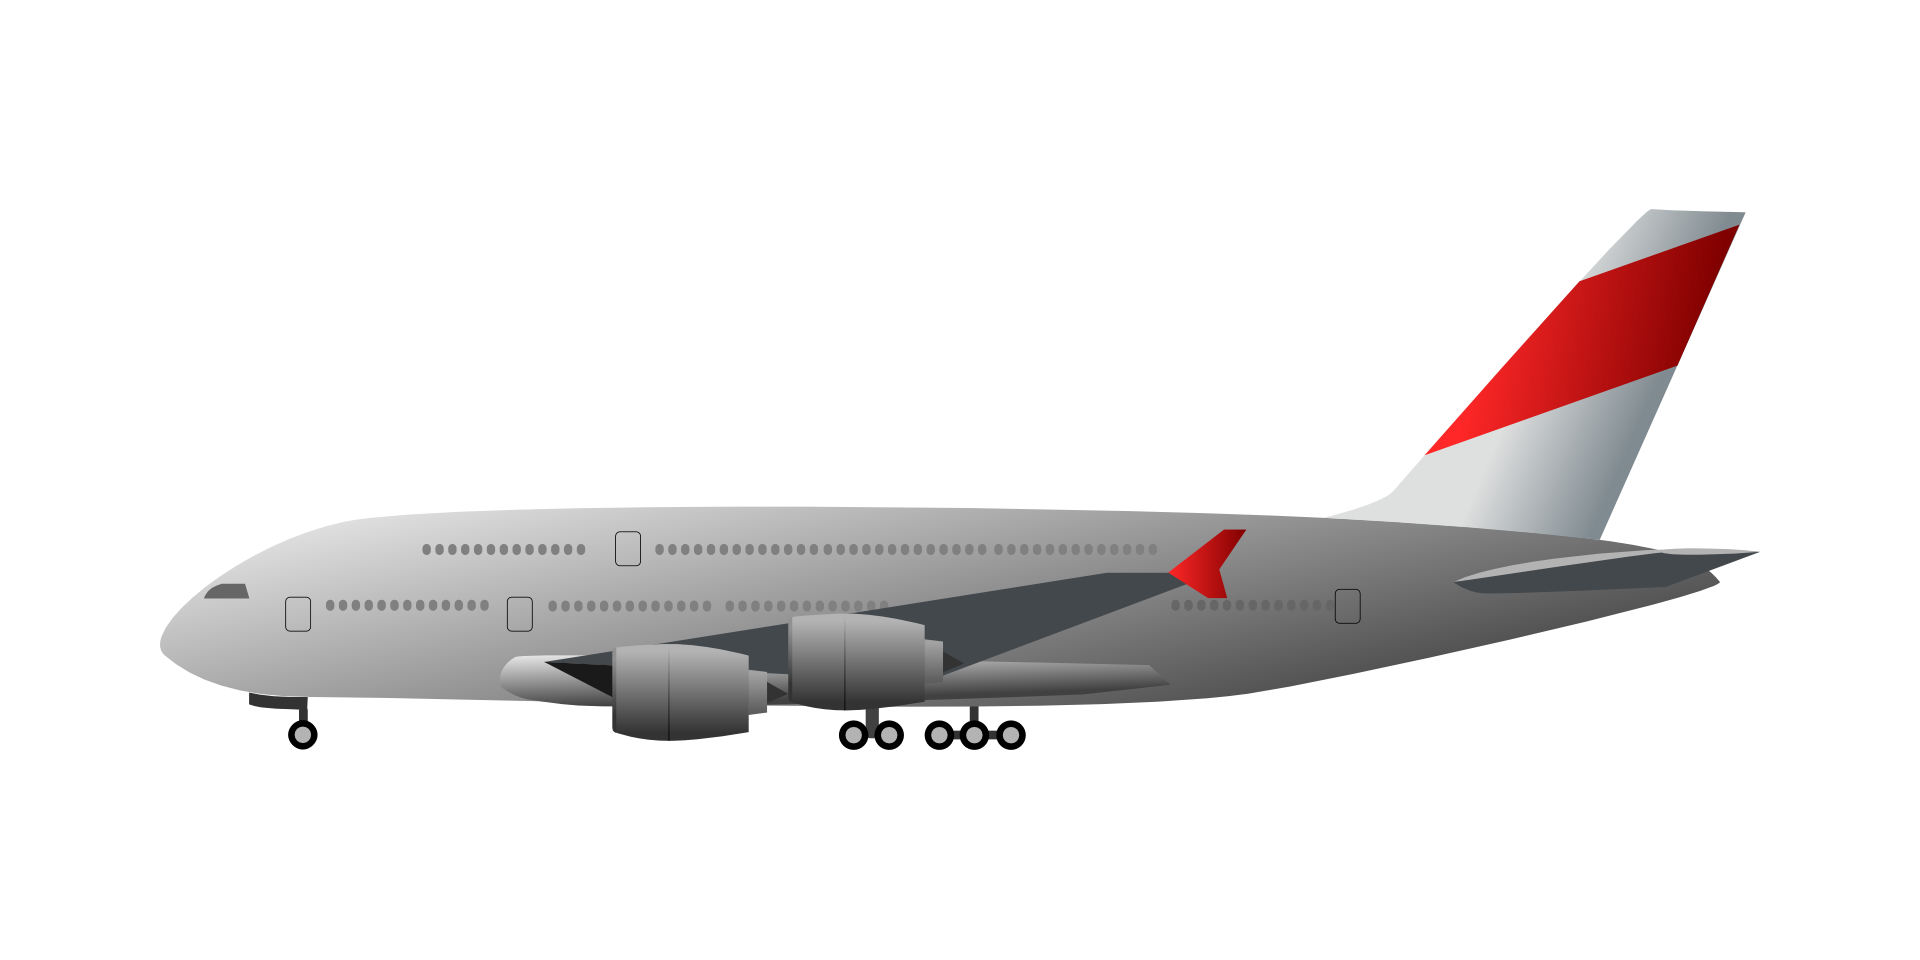 Airbus airplane vector drawing free image